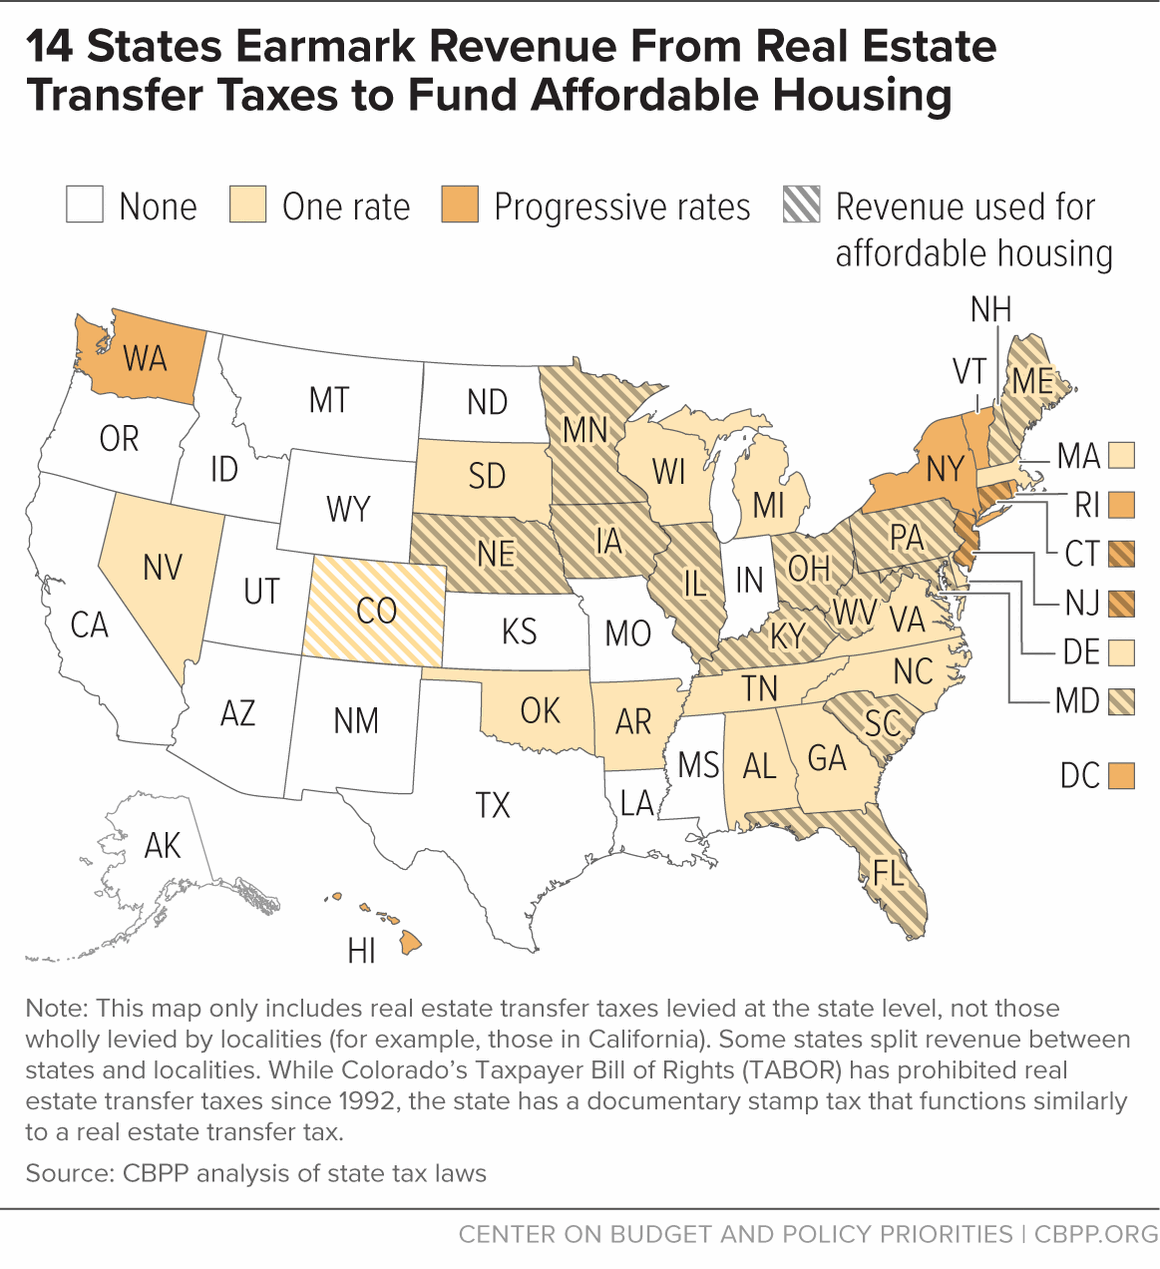 14 States Earmark Revenue From Real Estate Transfer Taxes to Fund Affordable Housing